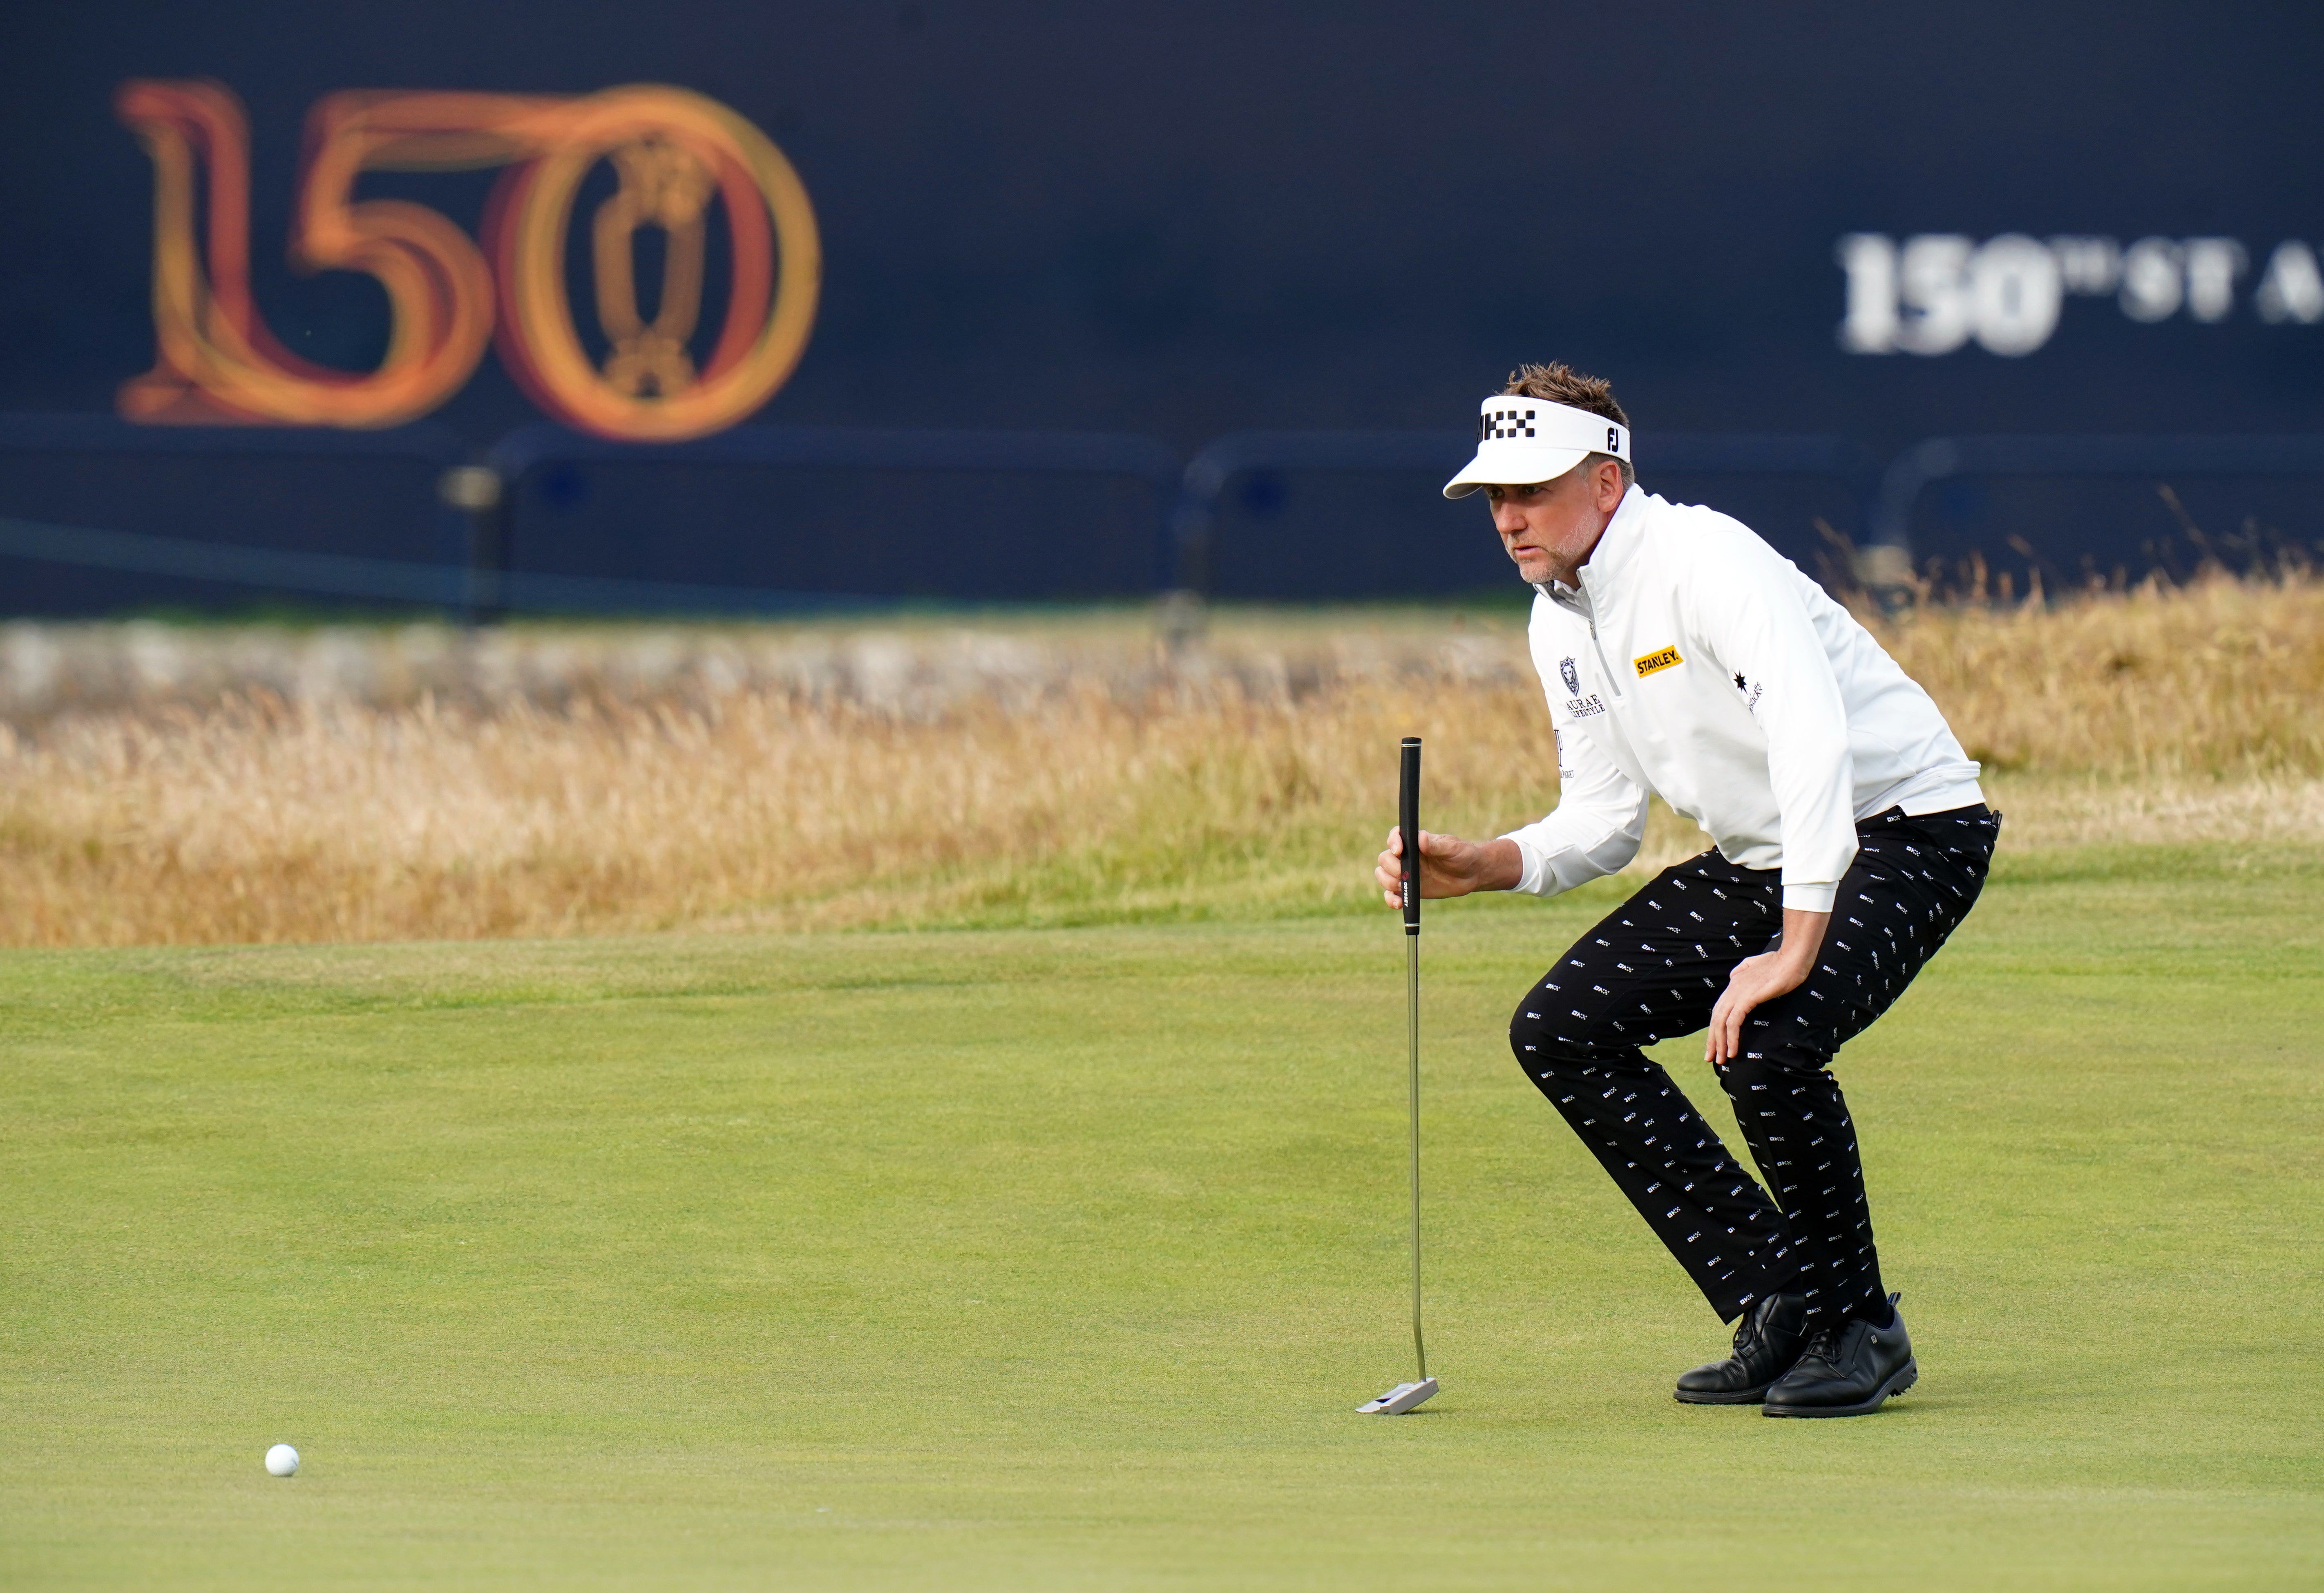 Ian Poulter had a challenging start to the 150th Open (Jane Barlow/PA)